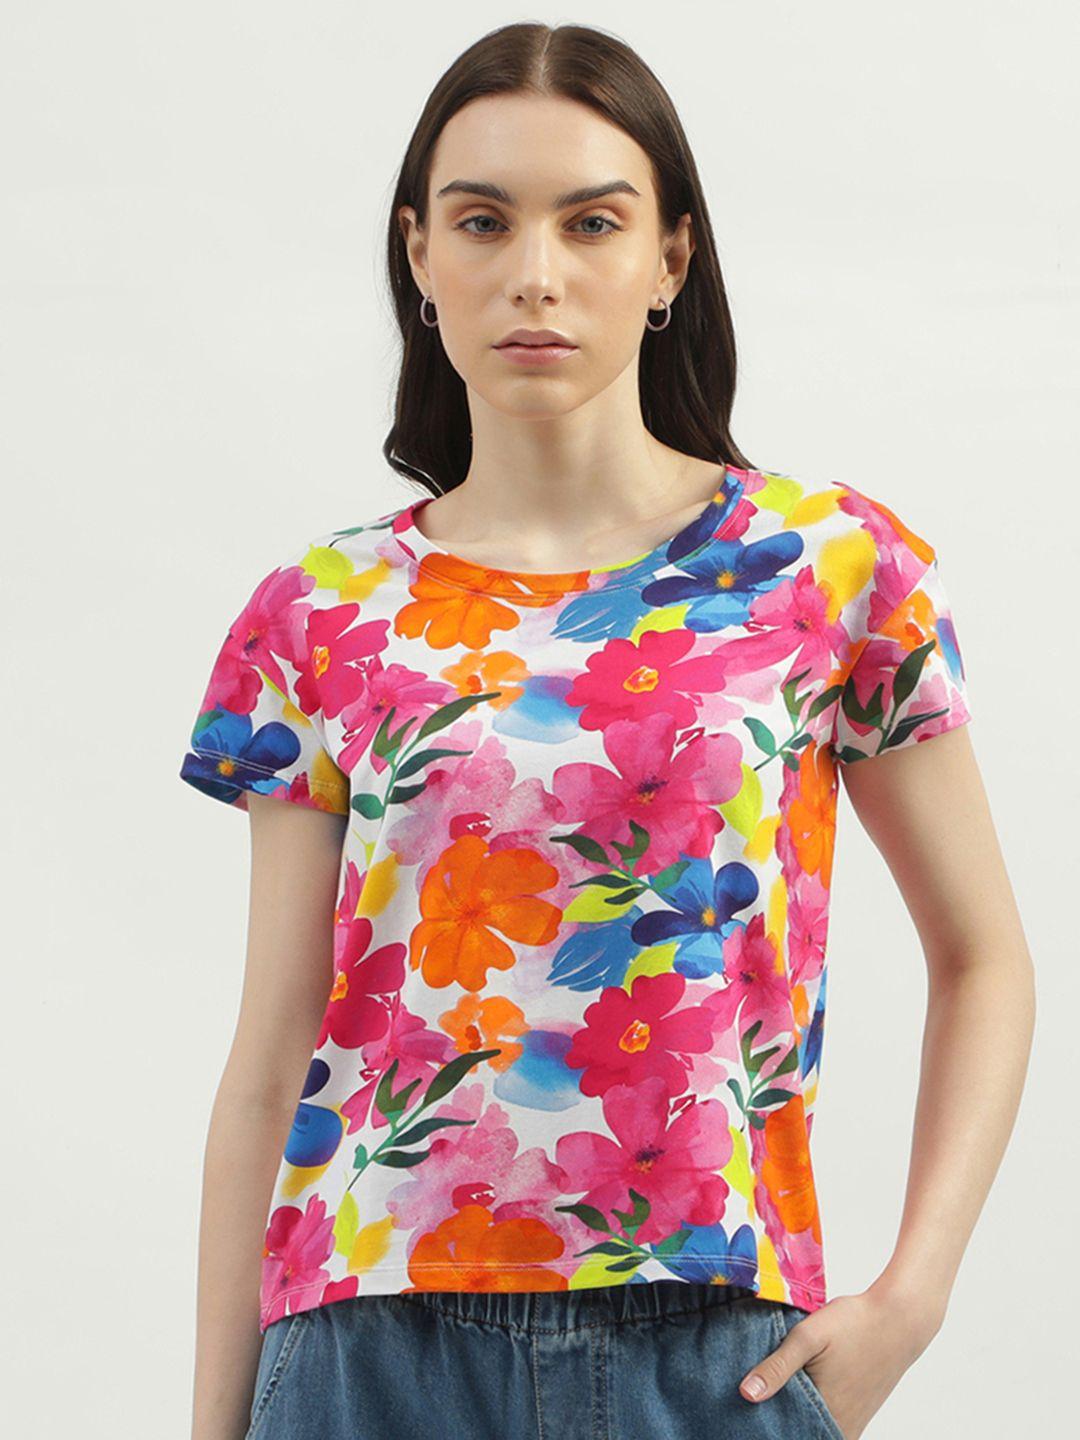 united-colors-of-benetton-floral-printed-cotton-t-shirt